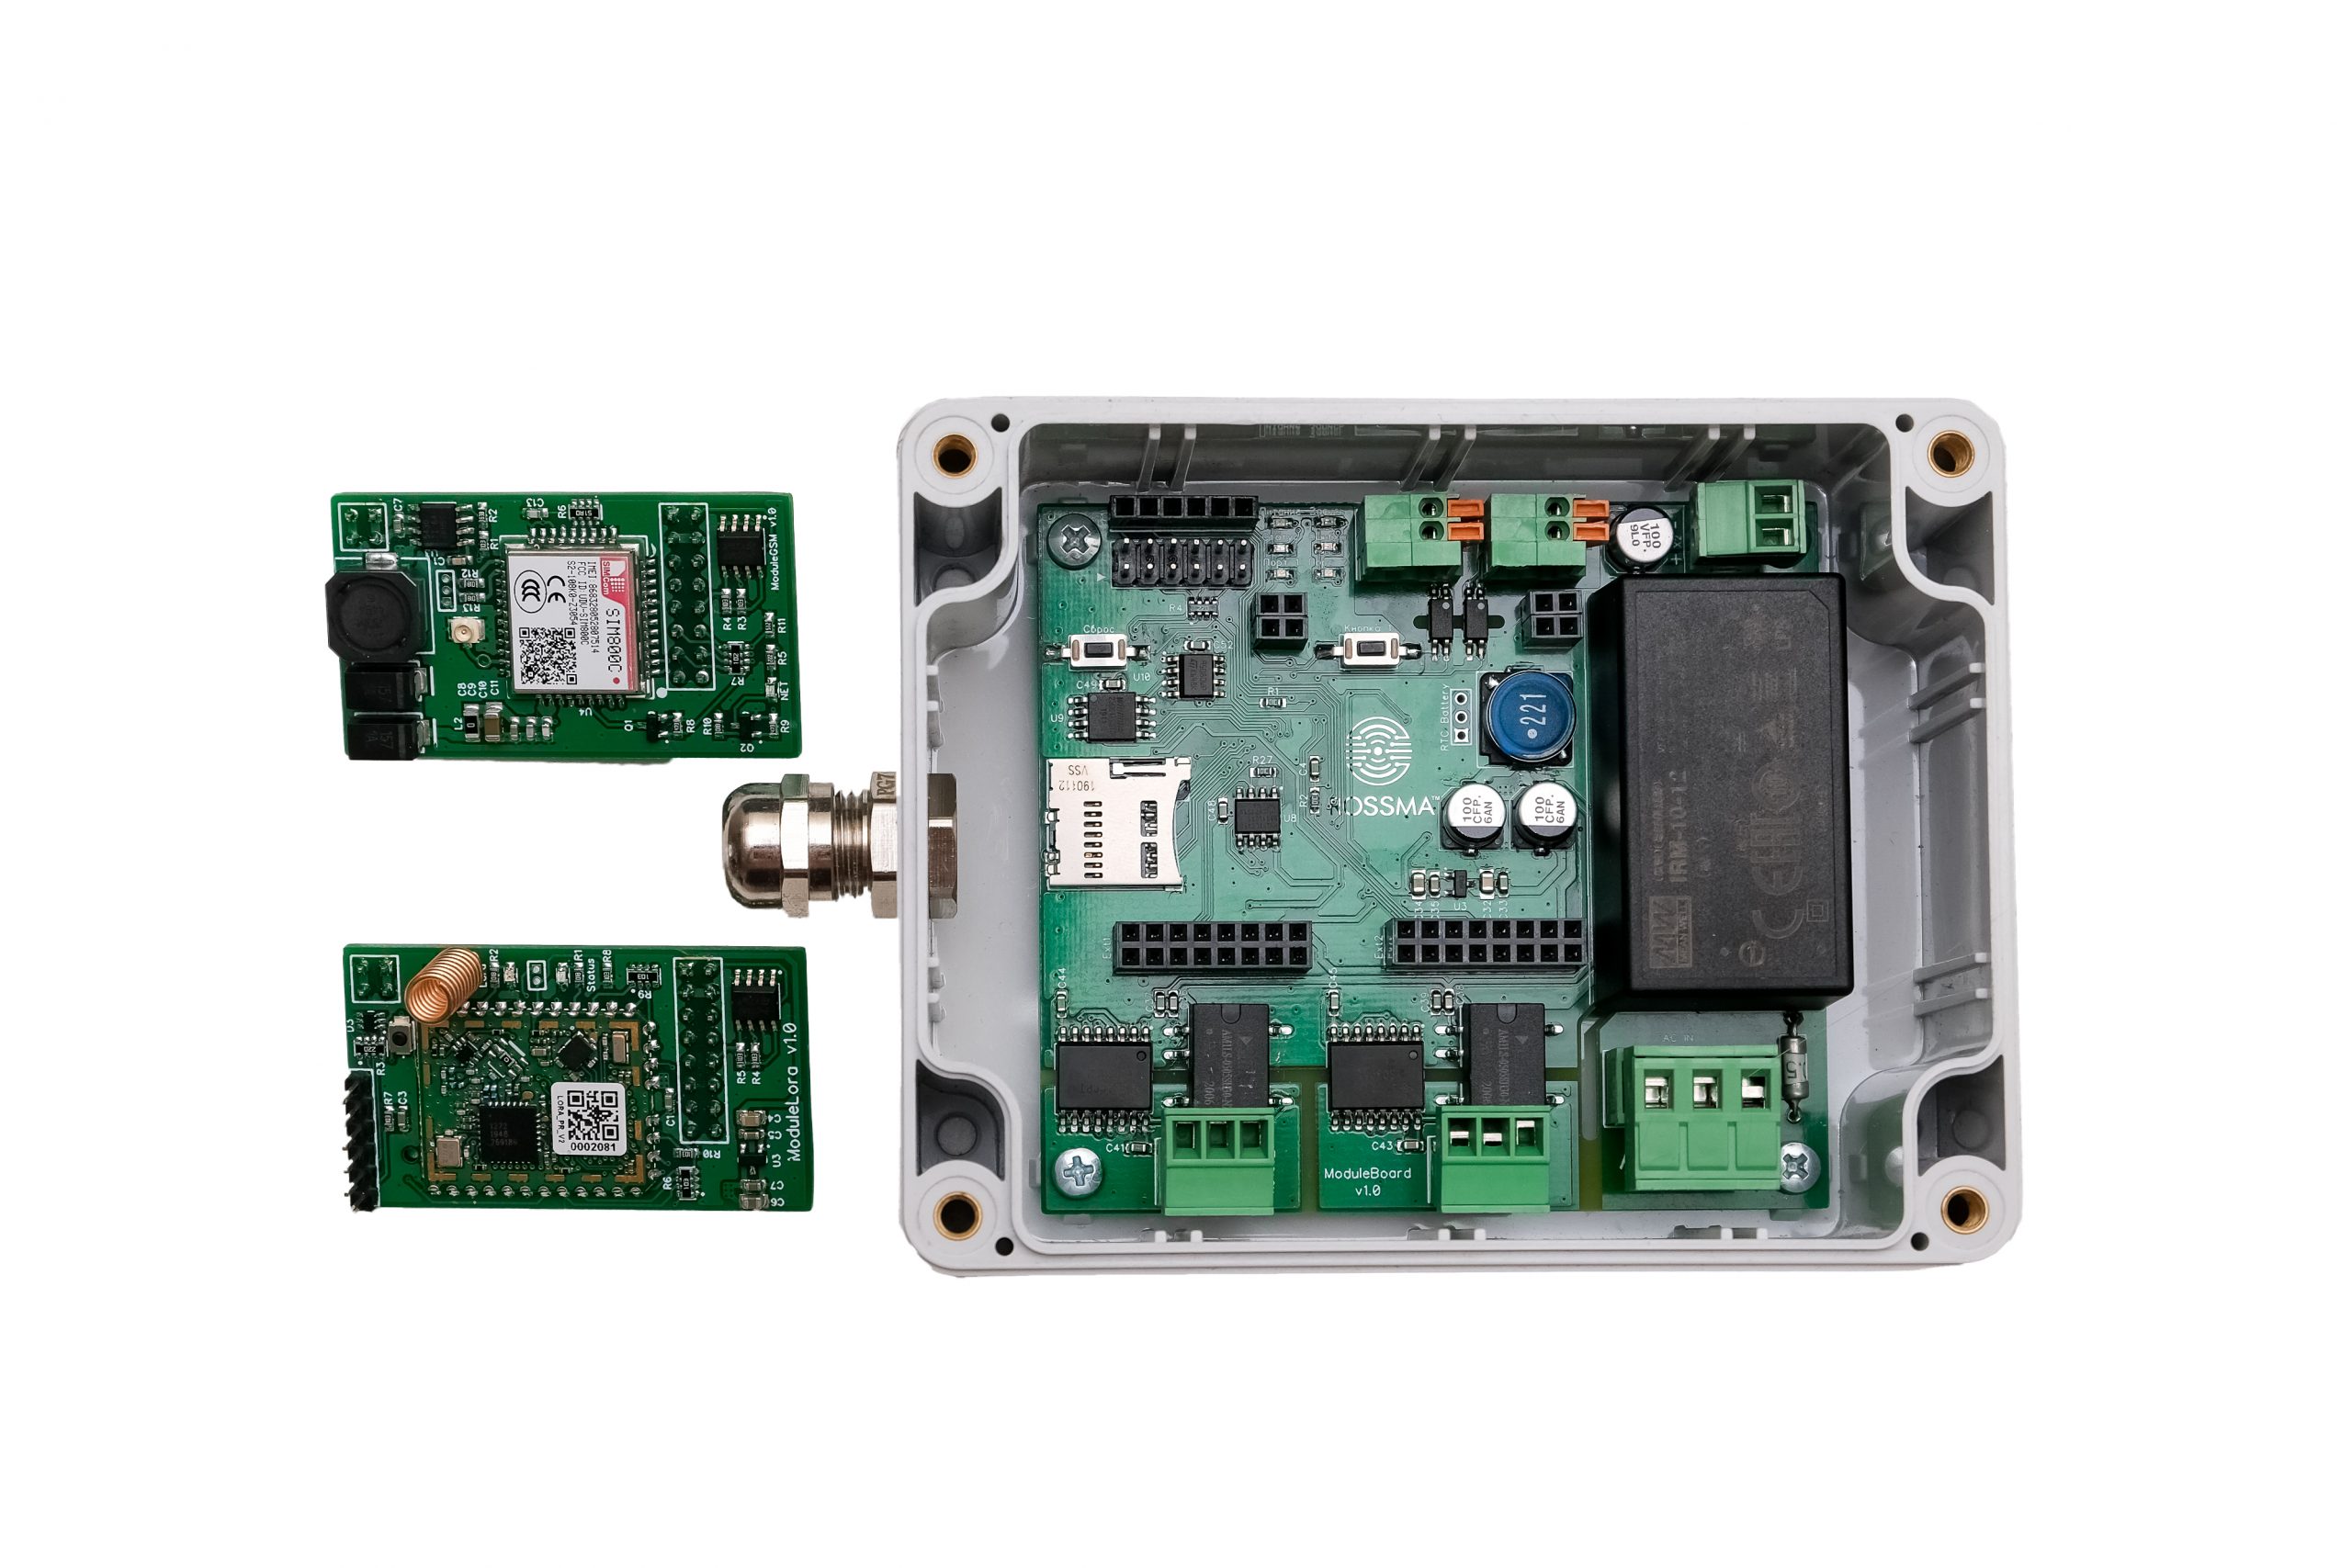 New features of ROSSMA ® IIOT-AMS switching devices